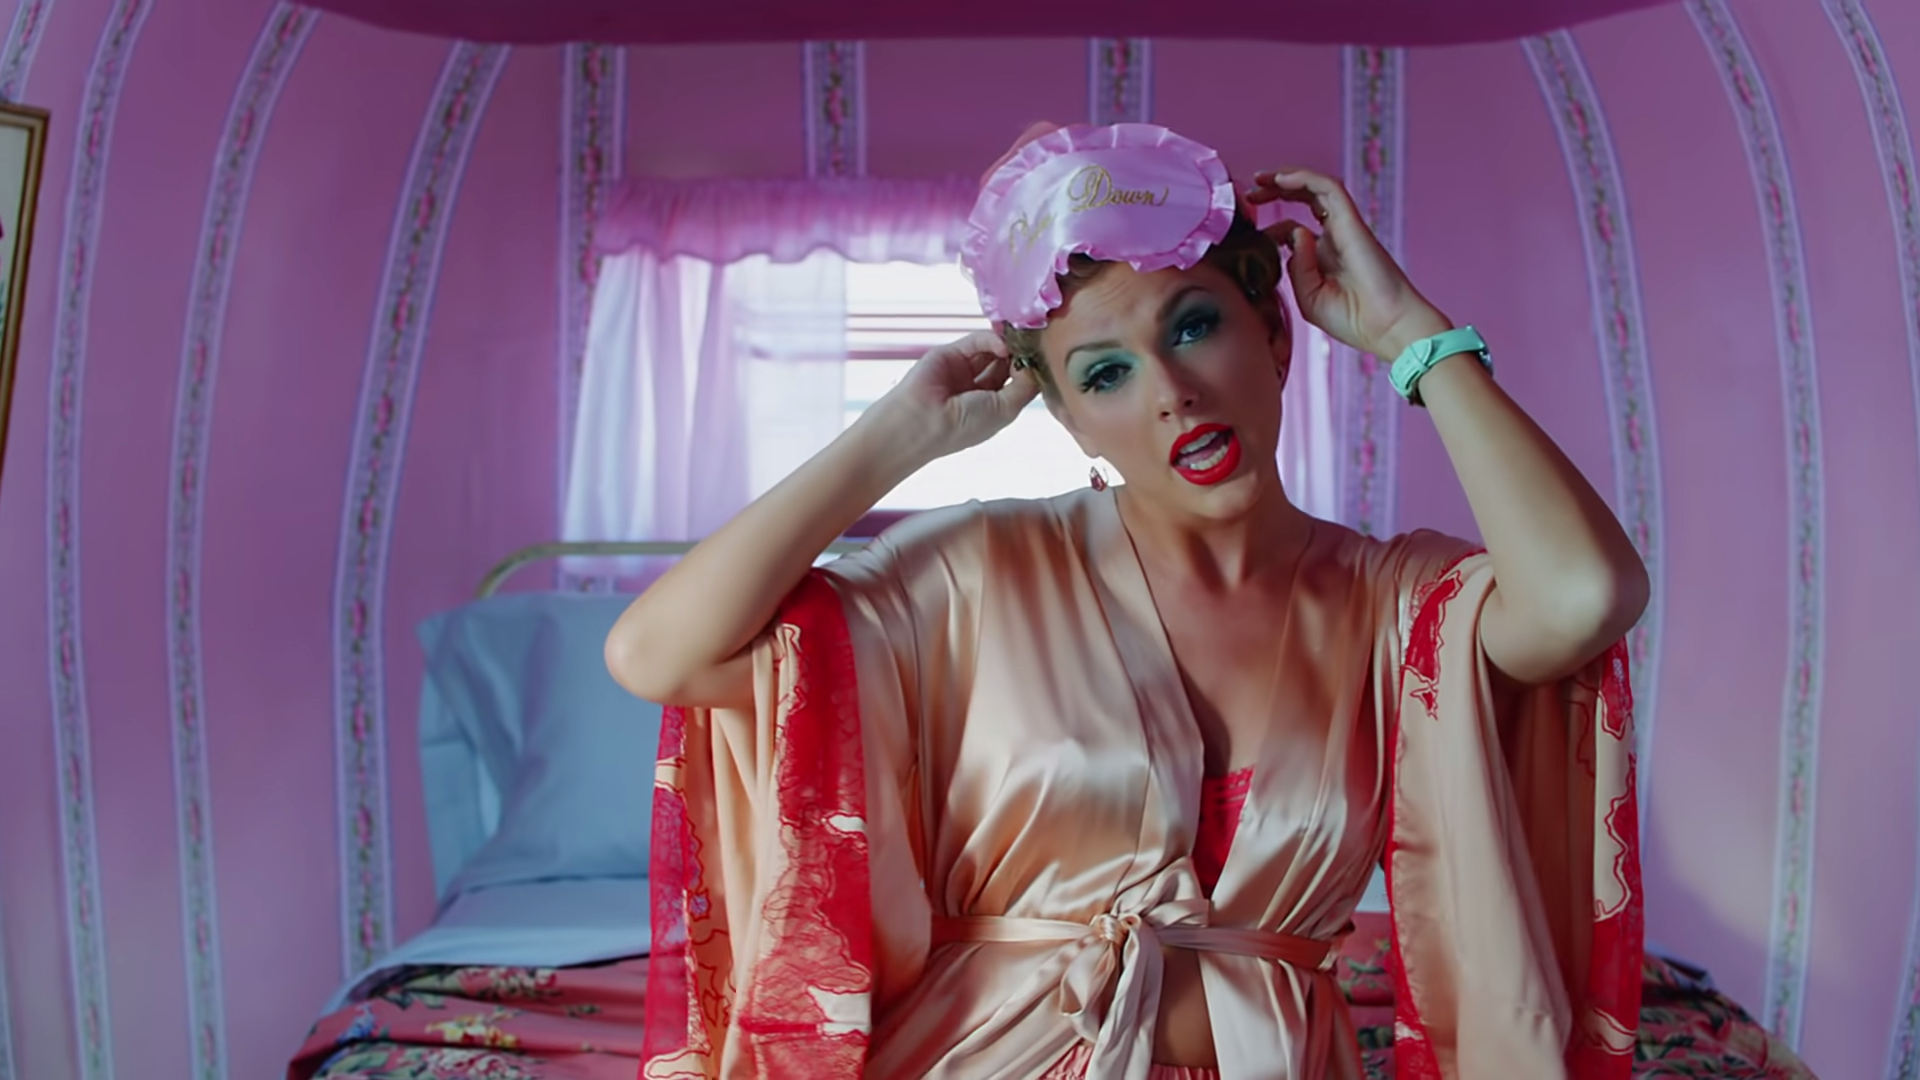 Screencap from the Taylor Swift "You Need To Calm Down" music video